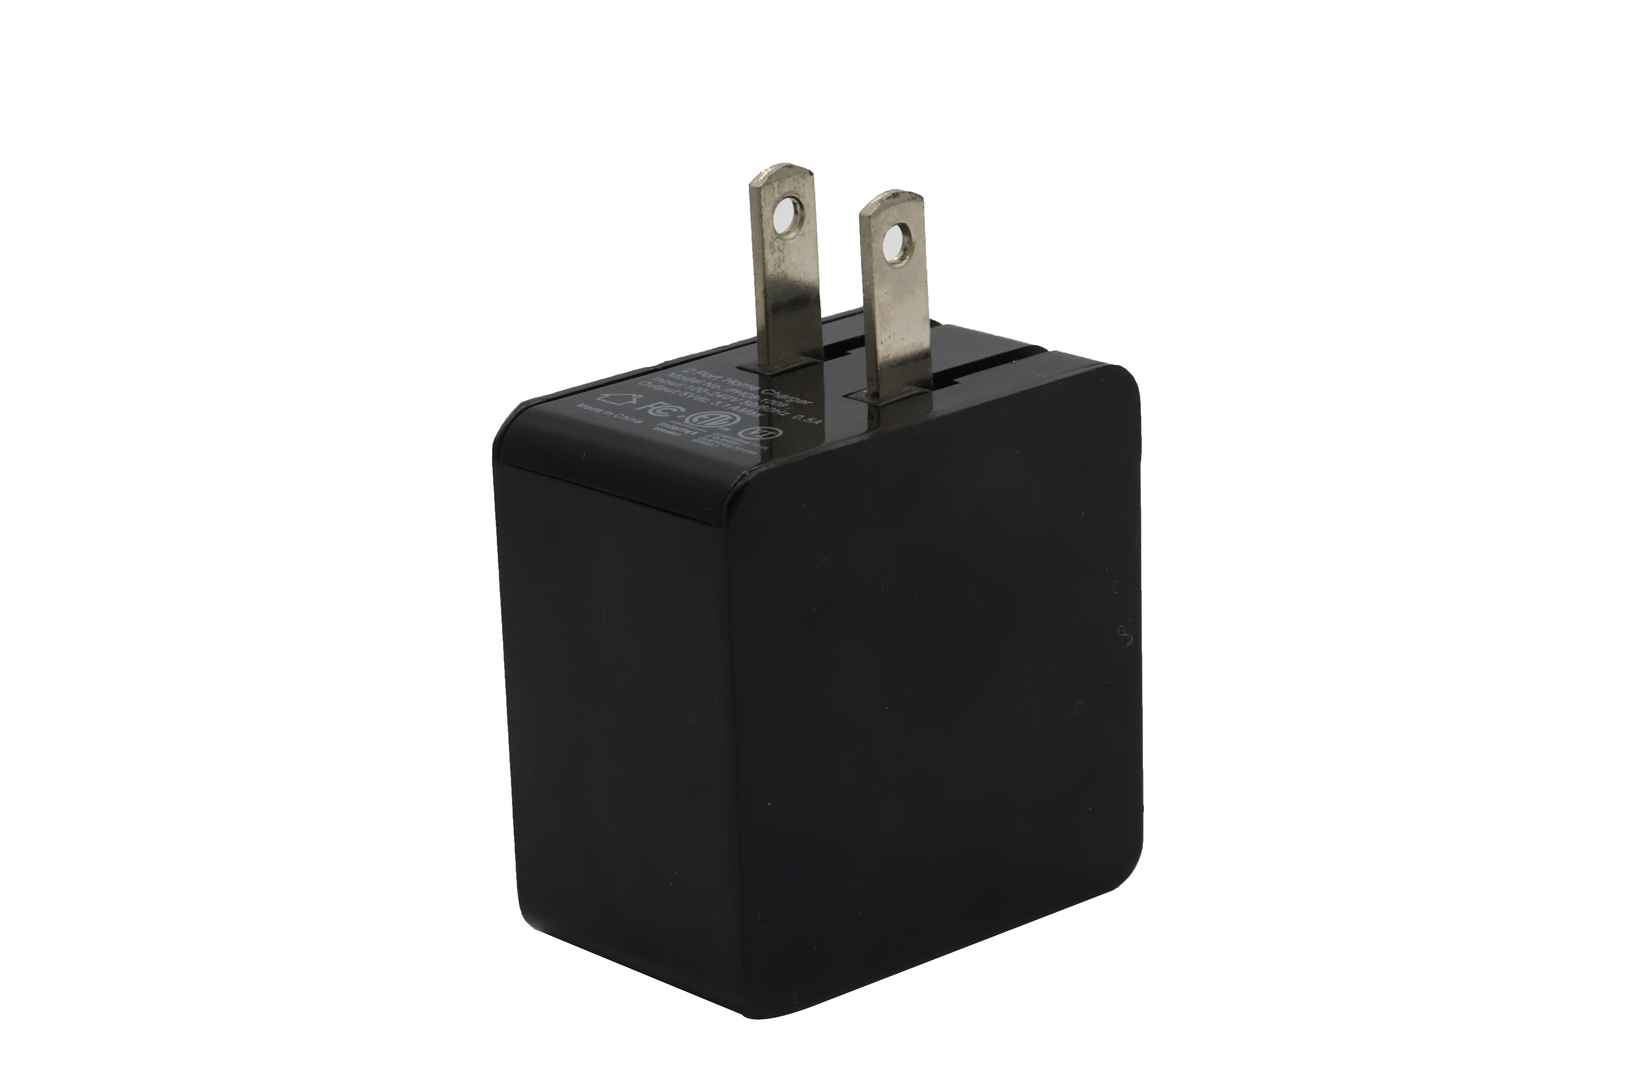 3. LM-J075 3.1A USB-A and Type-C Wall Charger Bulk Purchase and Corporate purchase from China Union Power -Description-